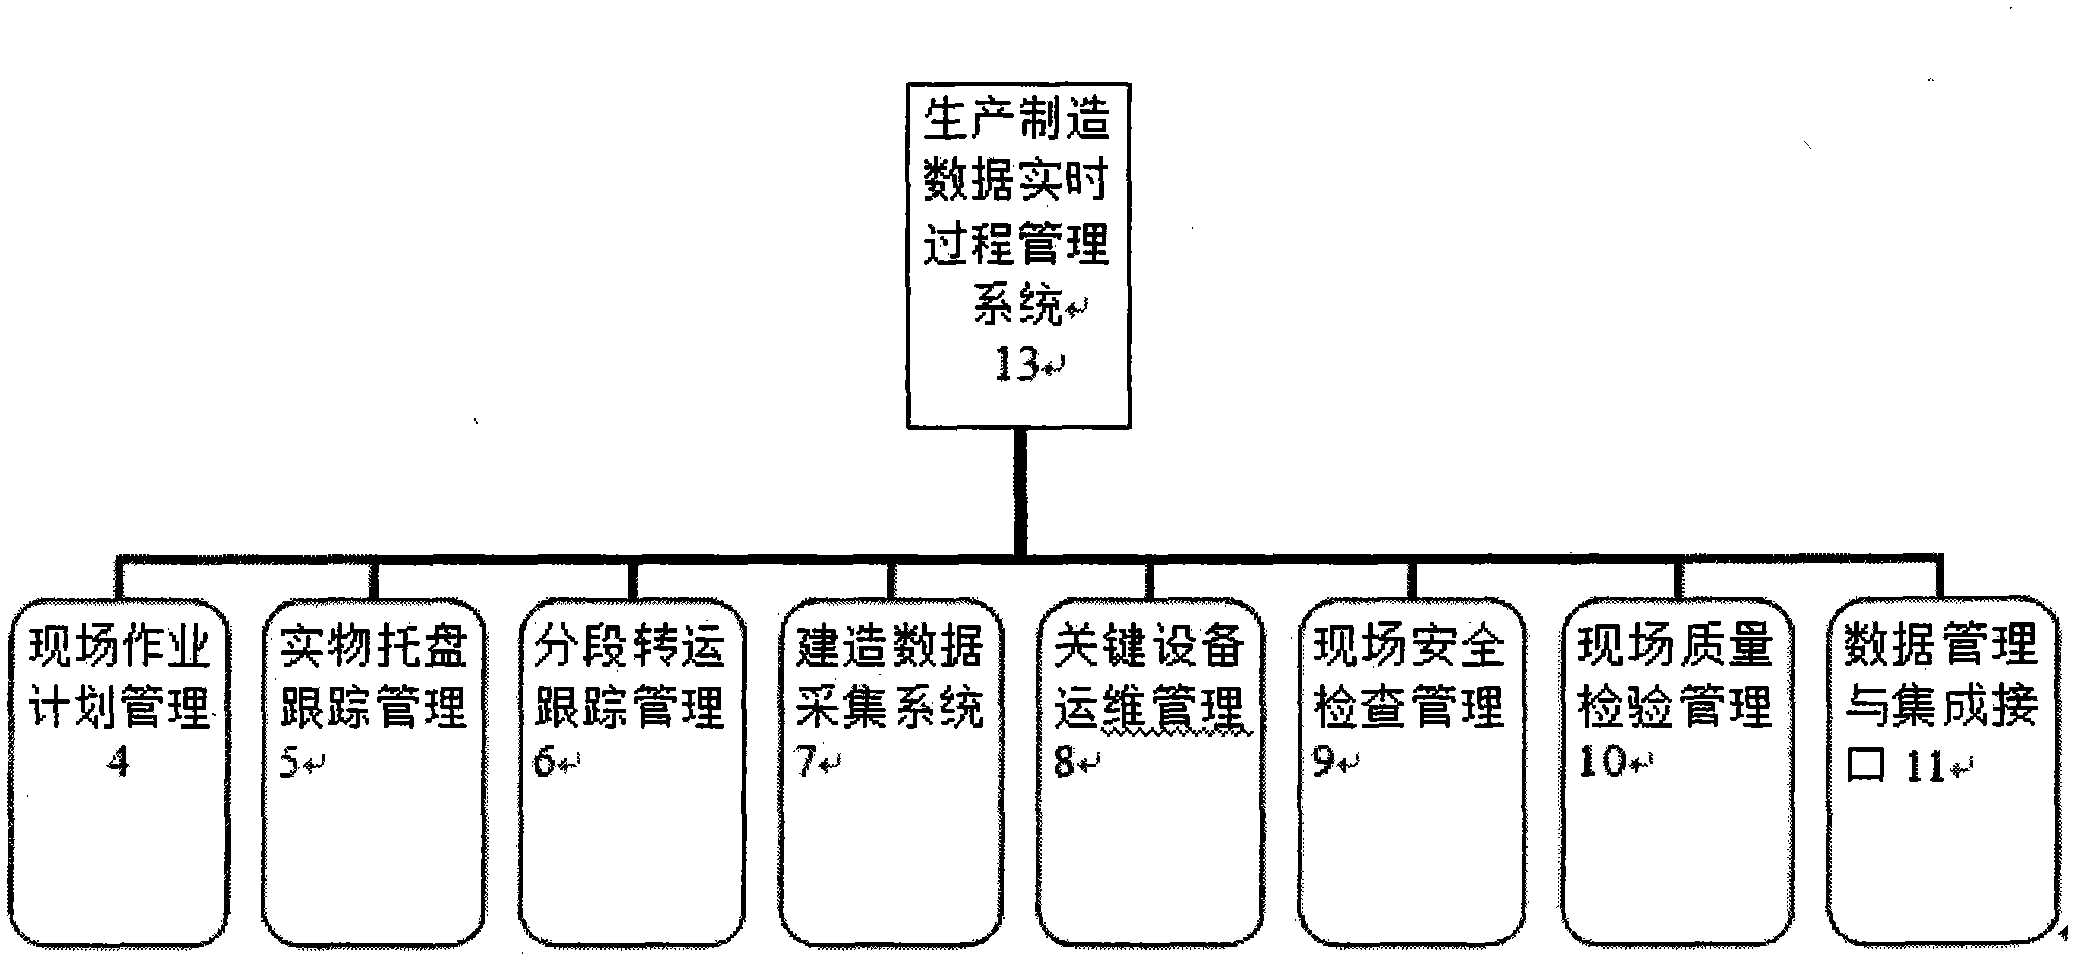 Multi-network-based manufacturing data real-time process management system and management method in ship manufacturing industry